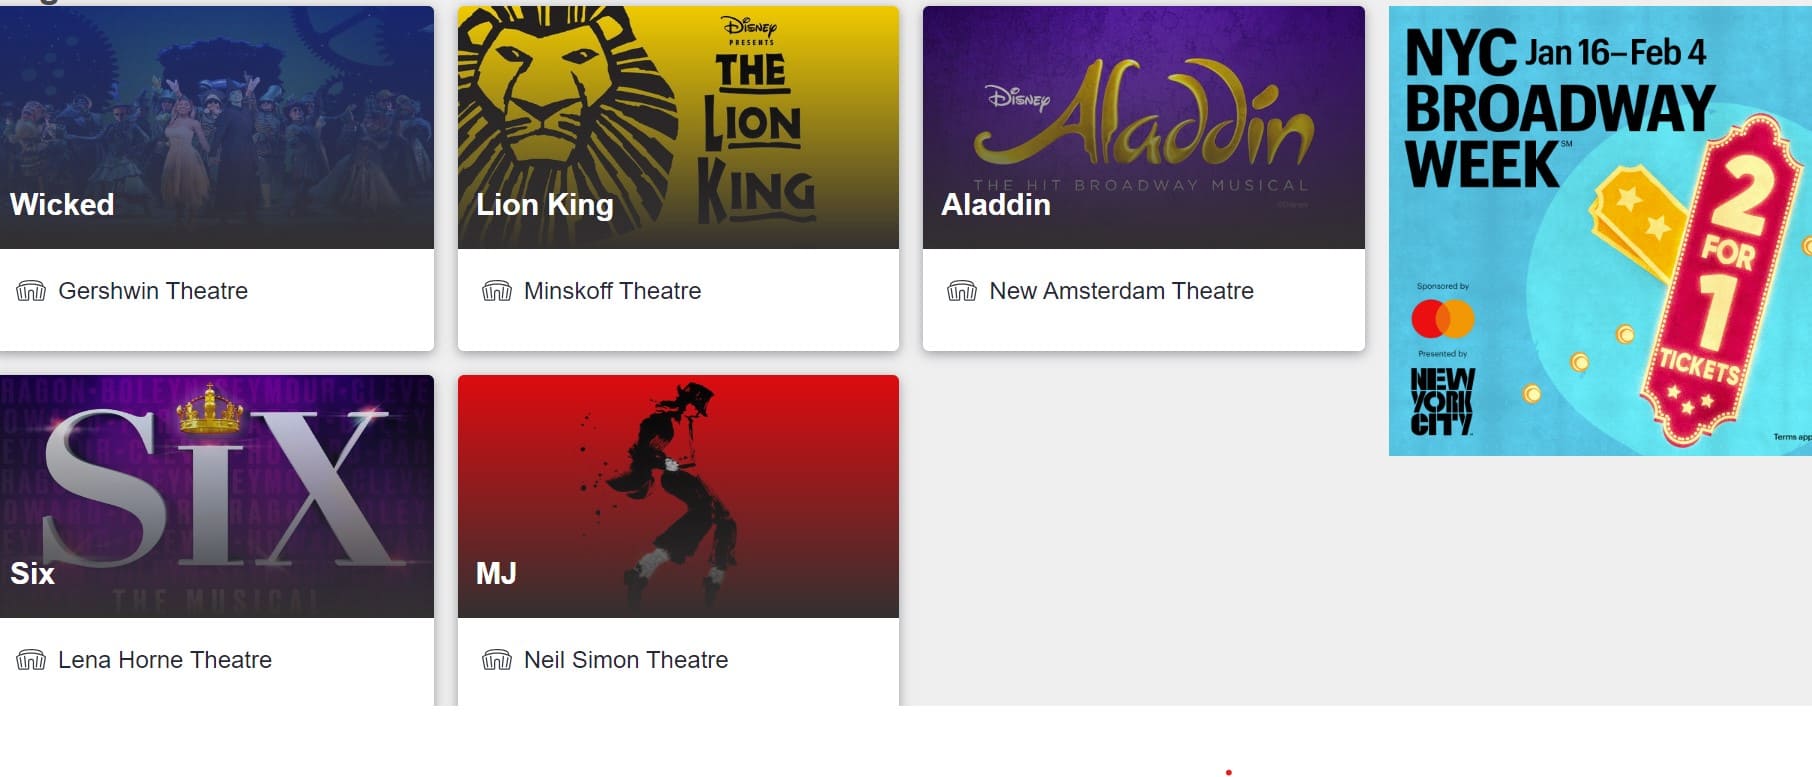 Broadway Week Ticketmaster Shows Announced!